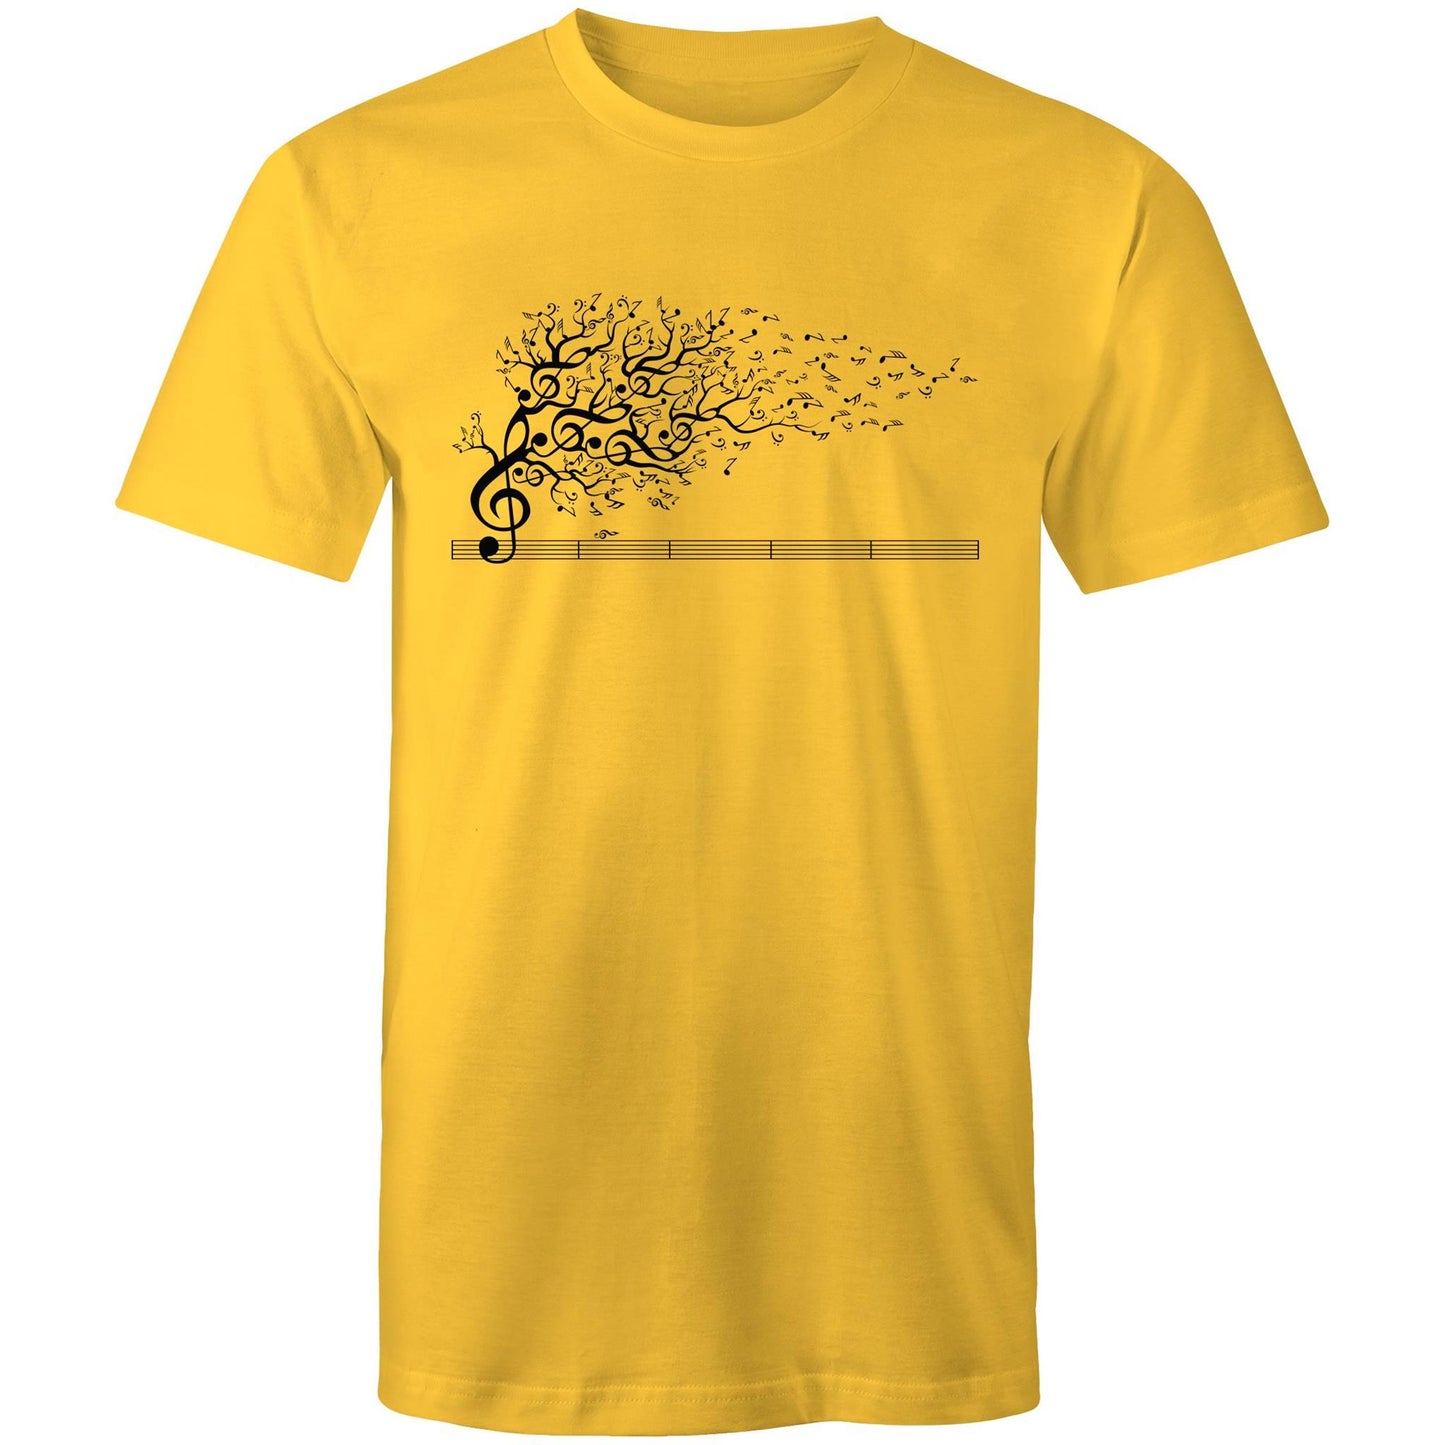 The Sound of Nature - Men's T-Shirt